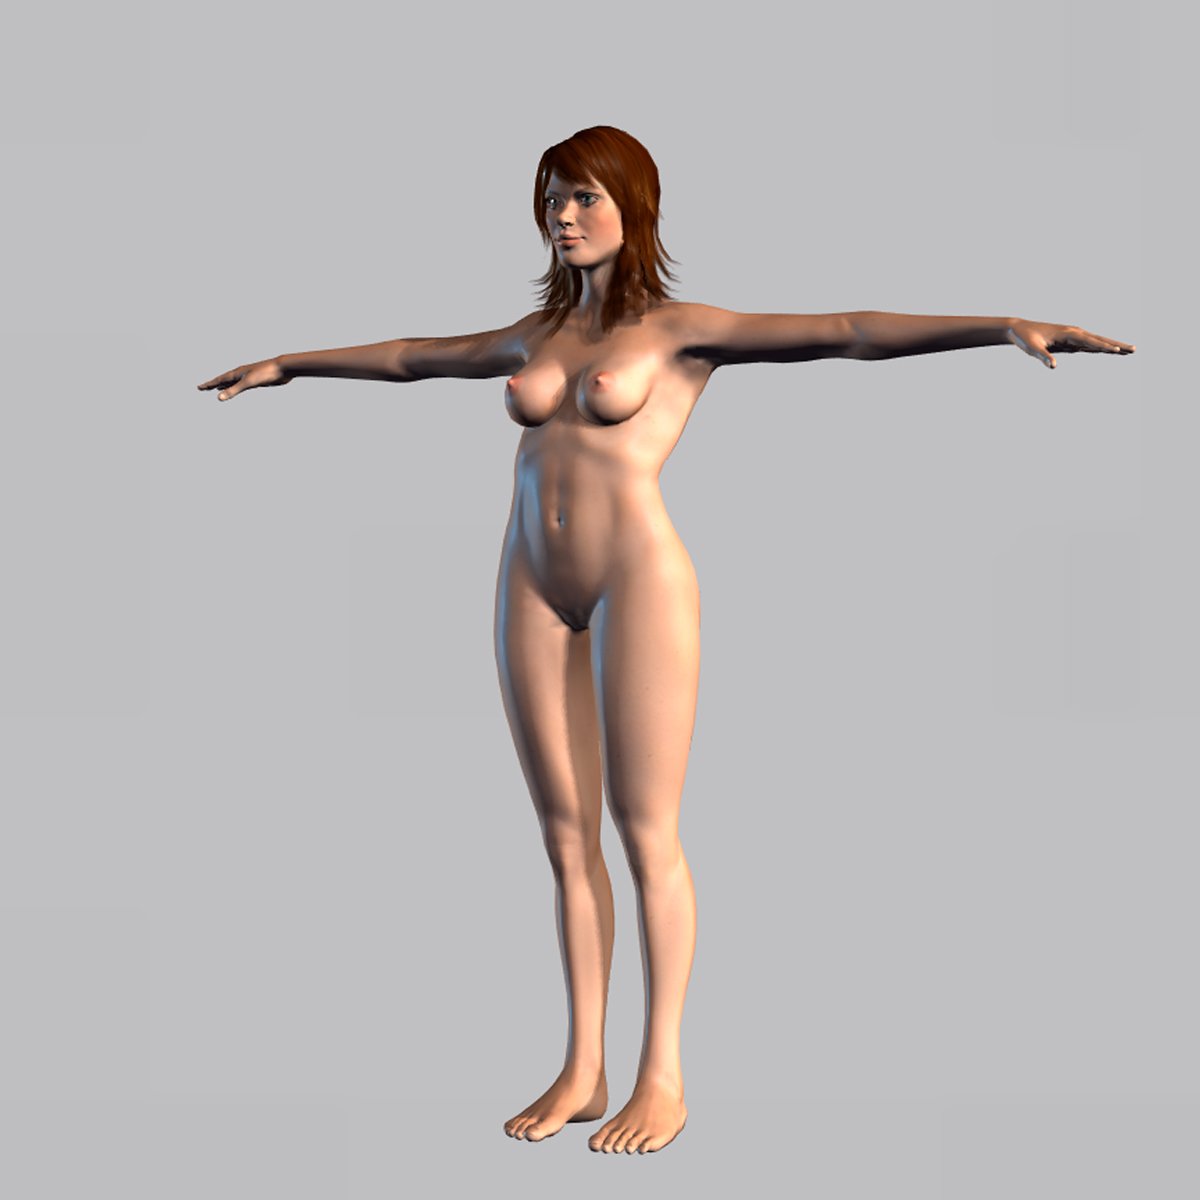 Woman. animated naked woman-rigged 3d game character 3D Models. 